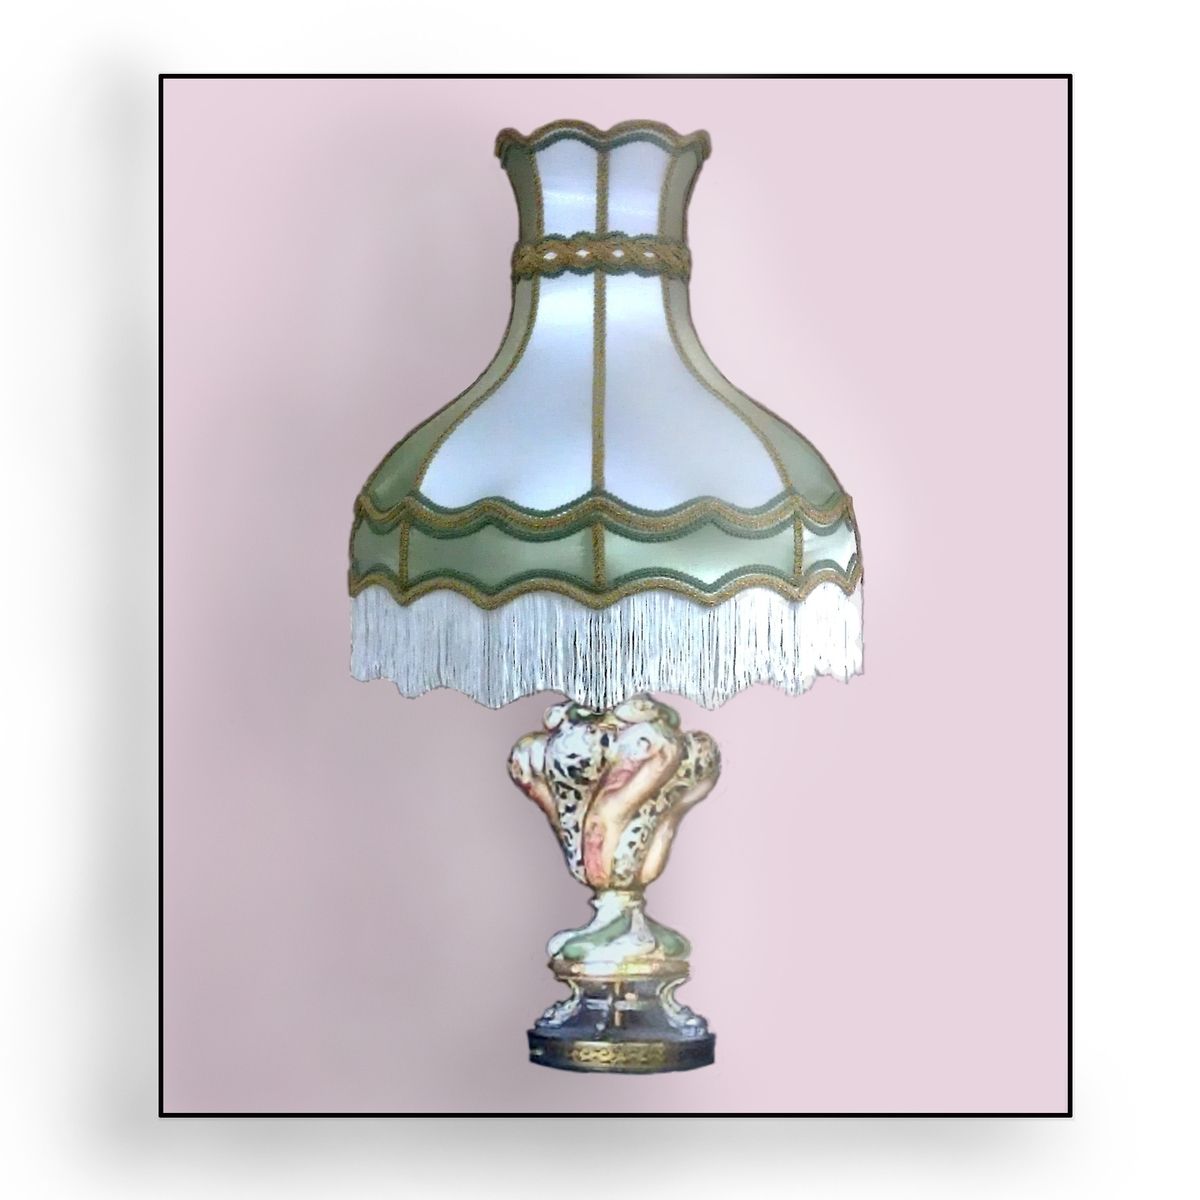 Hand Crafted Custom Lamp Shade For A Capodimonte Vintage Lamp By Suzanne Michelle Illuminations Shadez Of Michelle Custommade Com,Baking Soda In Shoes